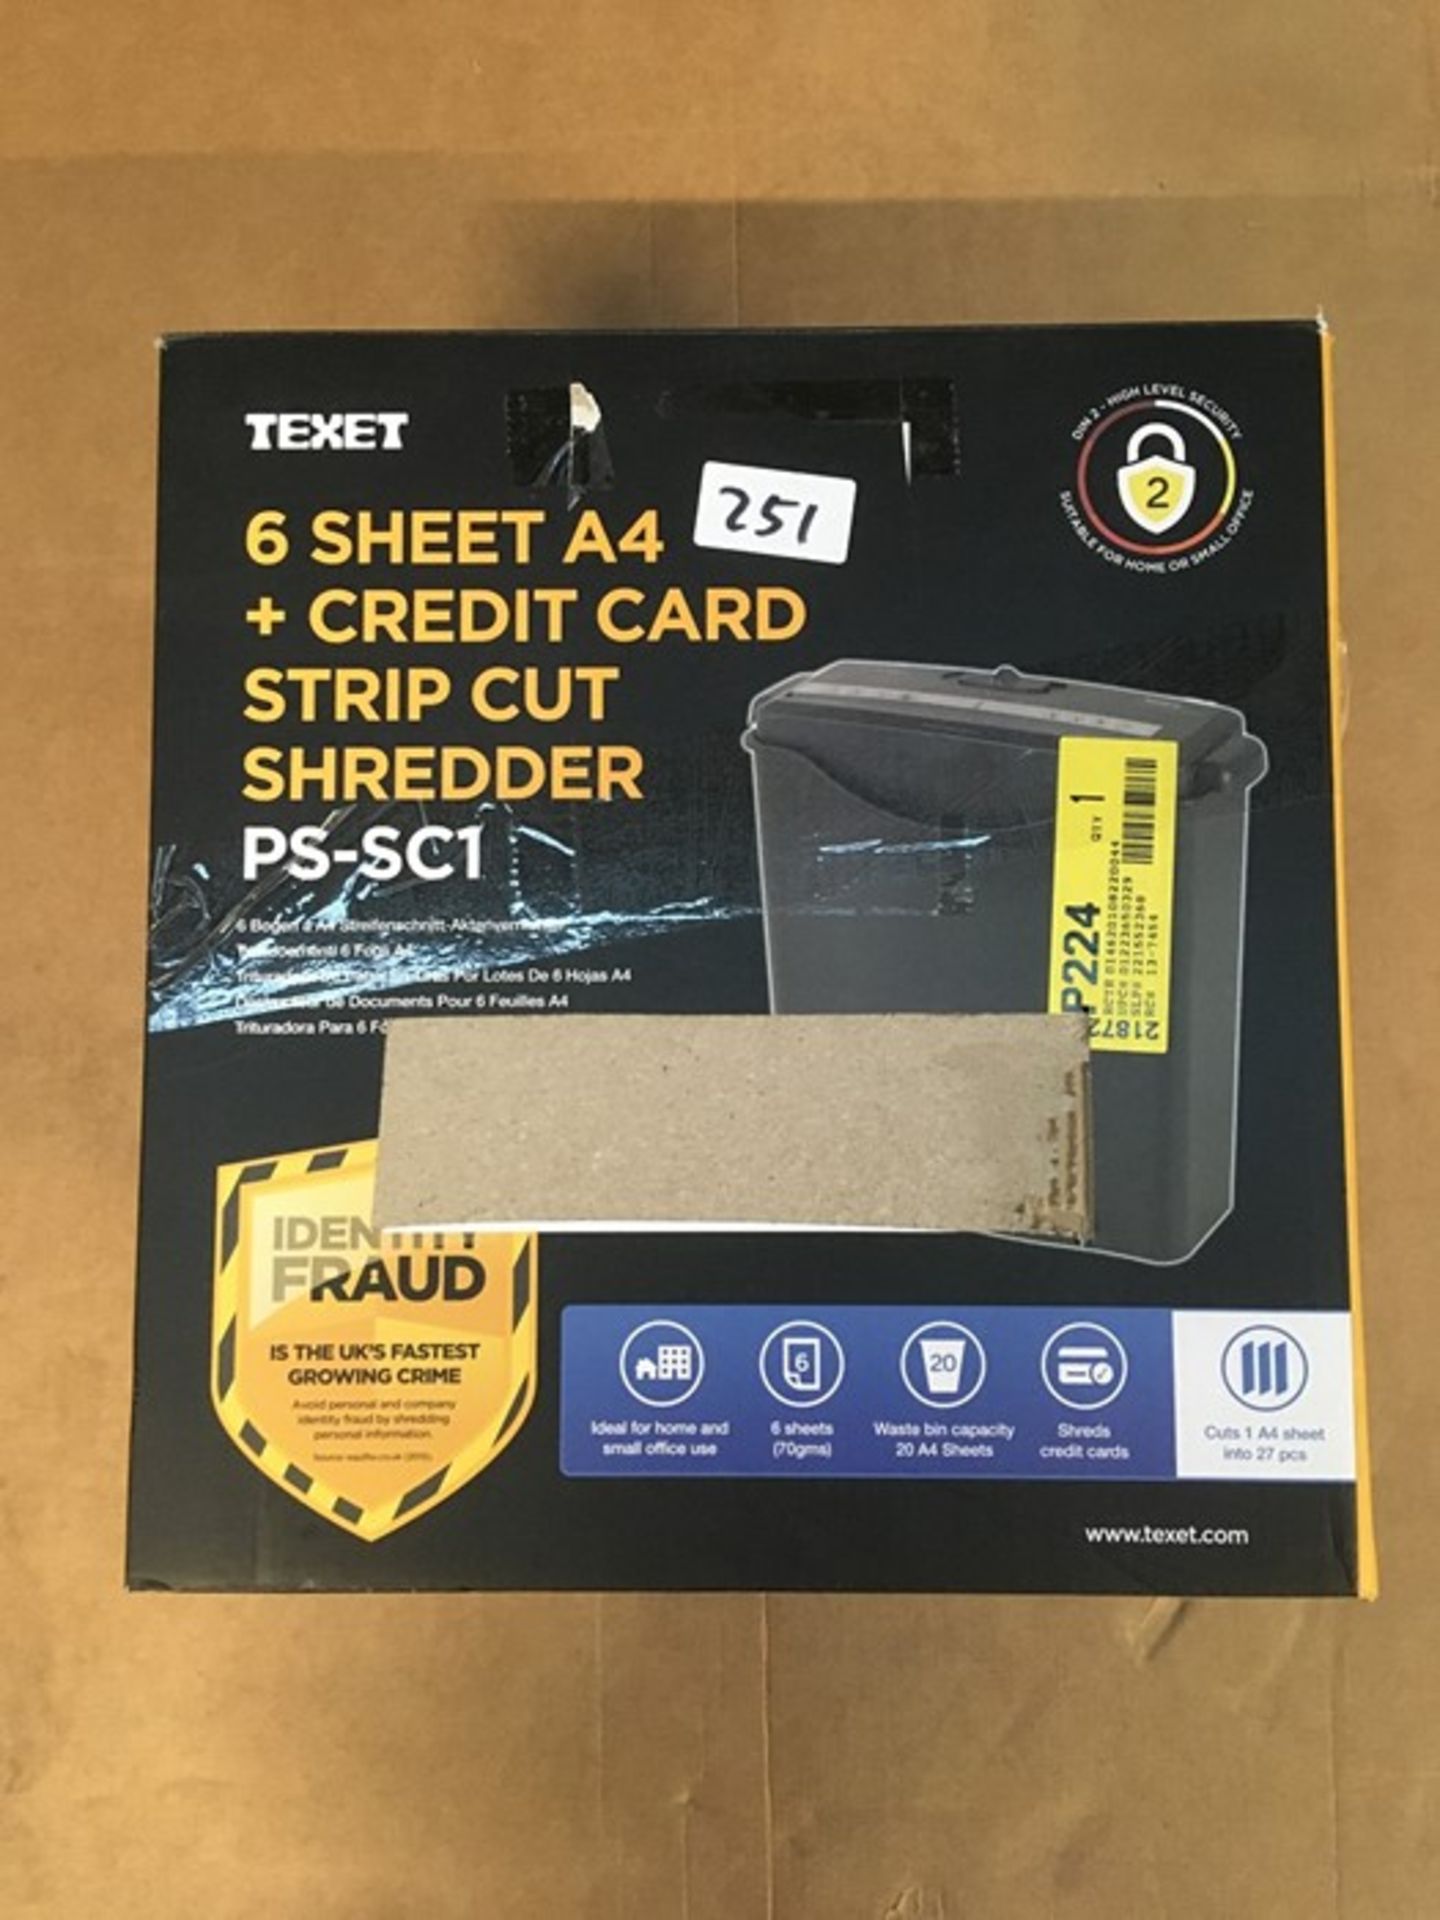 1 LOT TO CONTAIN 2 BOXED TEXET 6 SHEET A4 + CREDIT CARD STRIP CUT SHREDDER PS-SC1 / RRP £56.50/ BL -